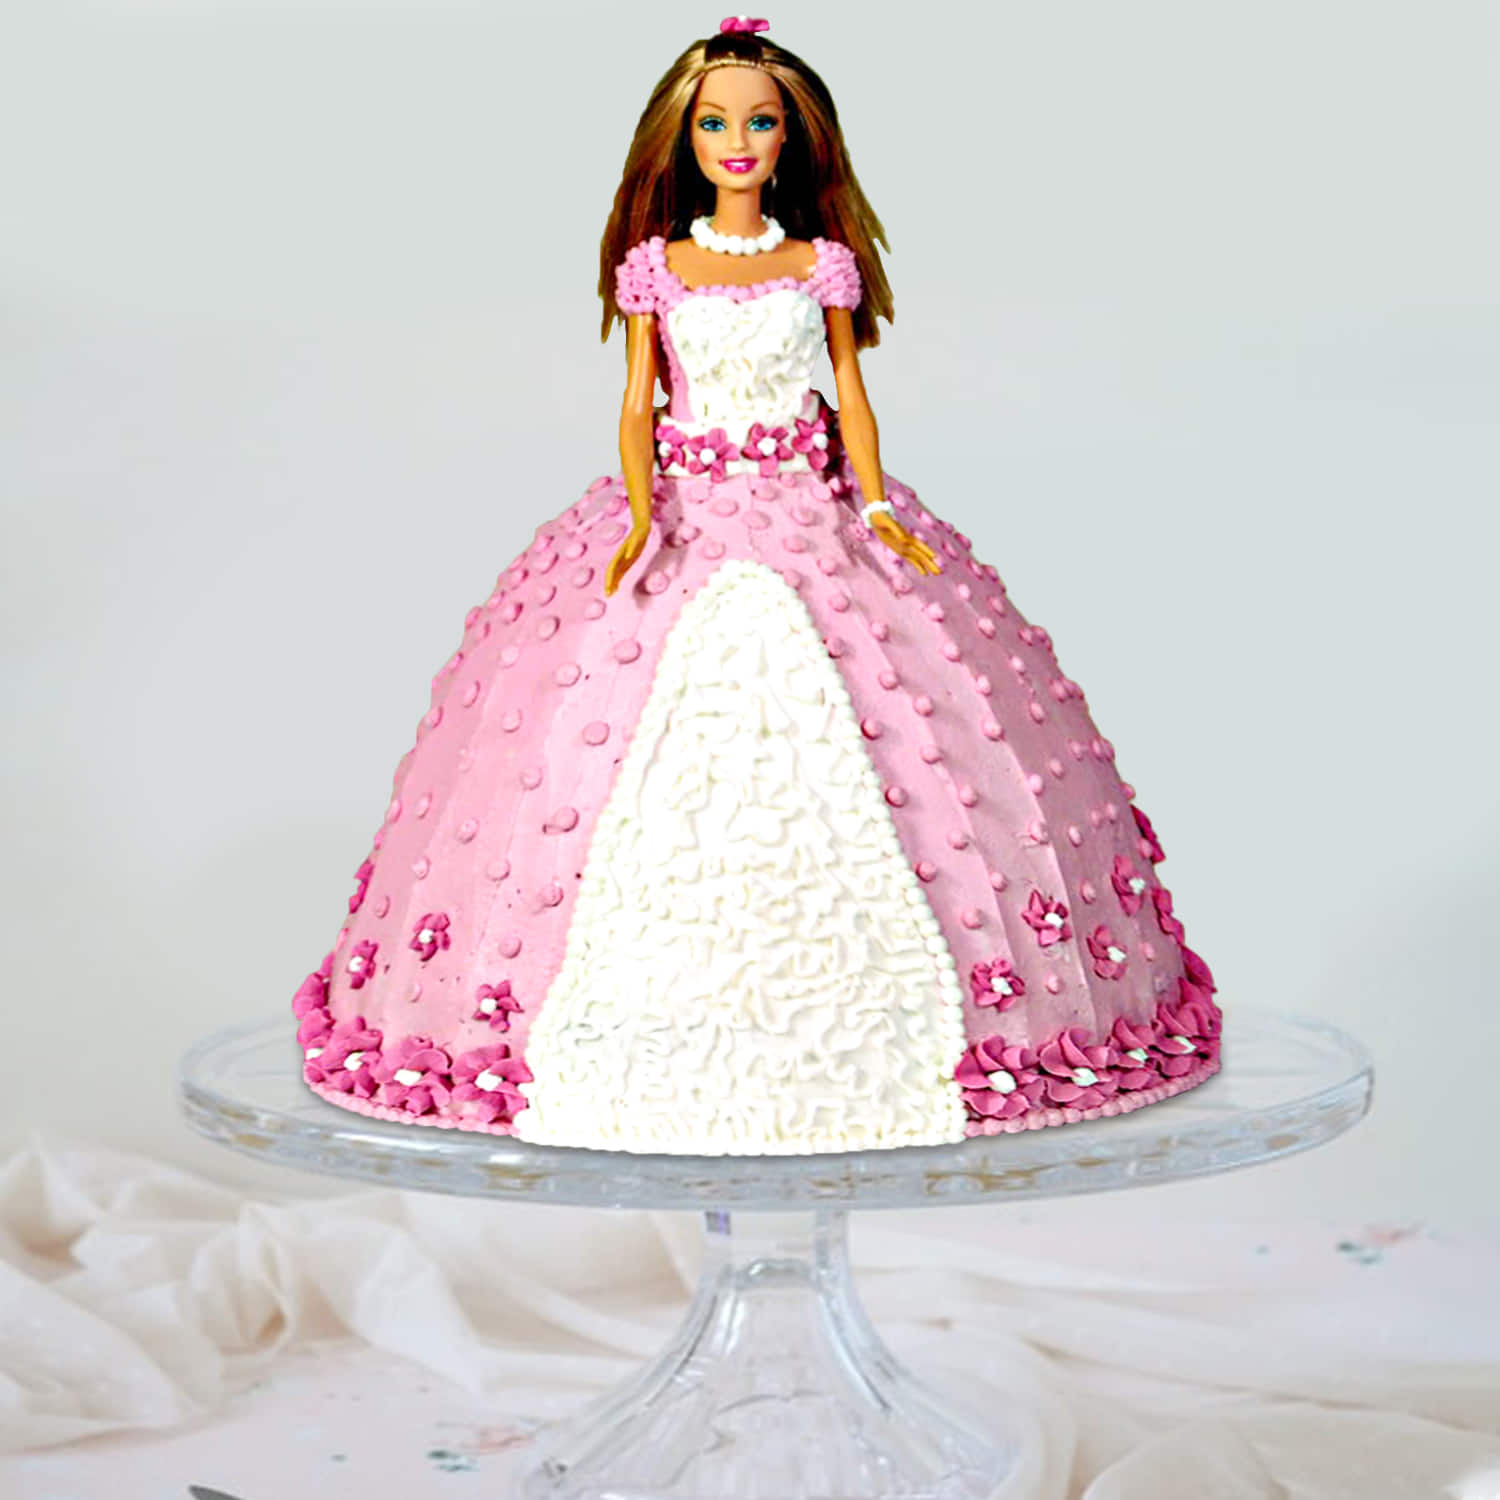 Doll Cake – Drooling Sweetness